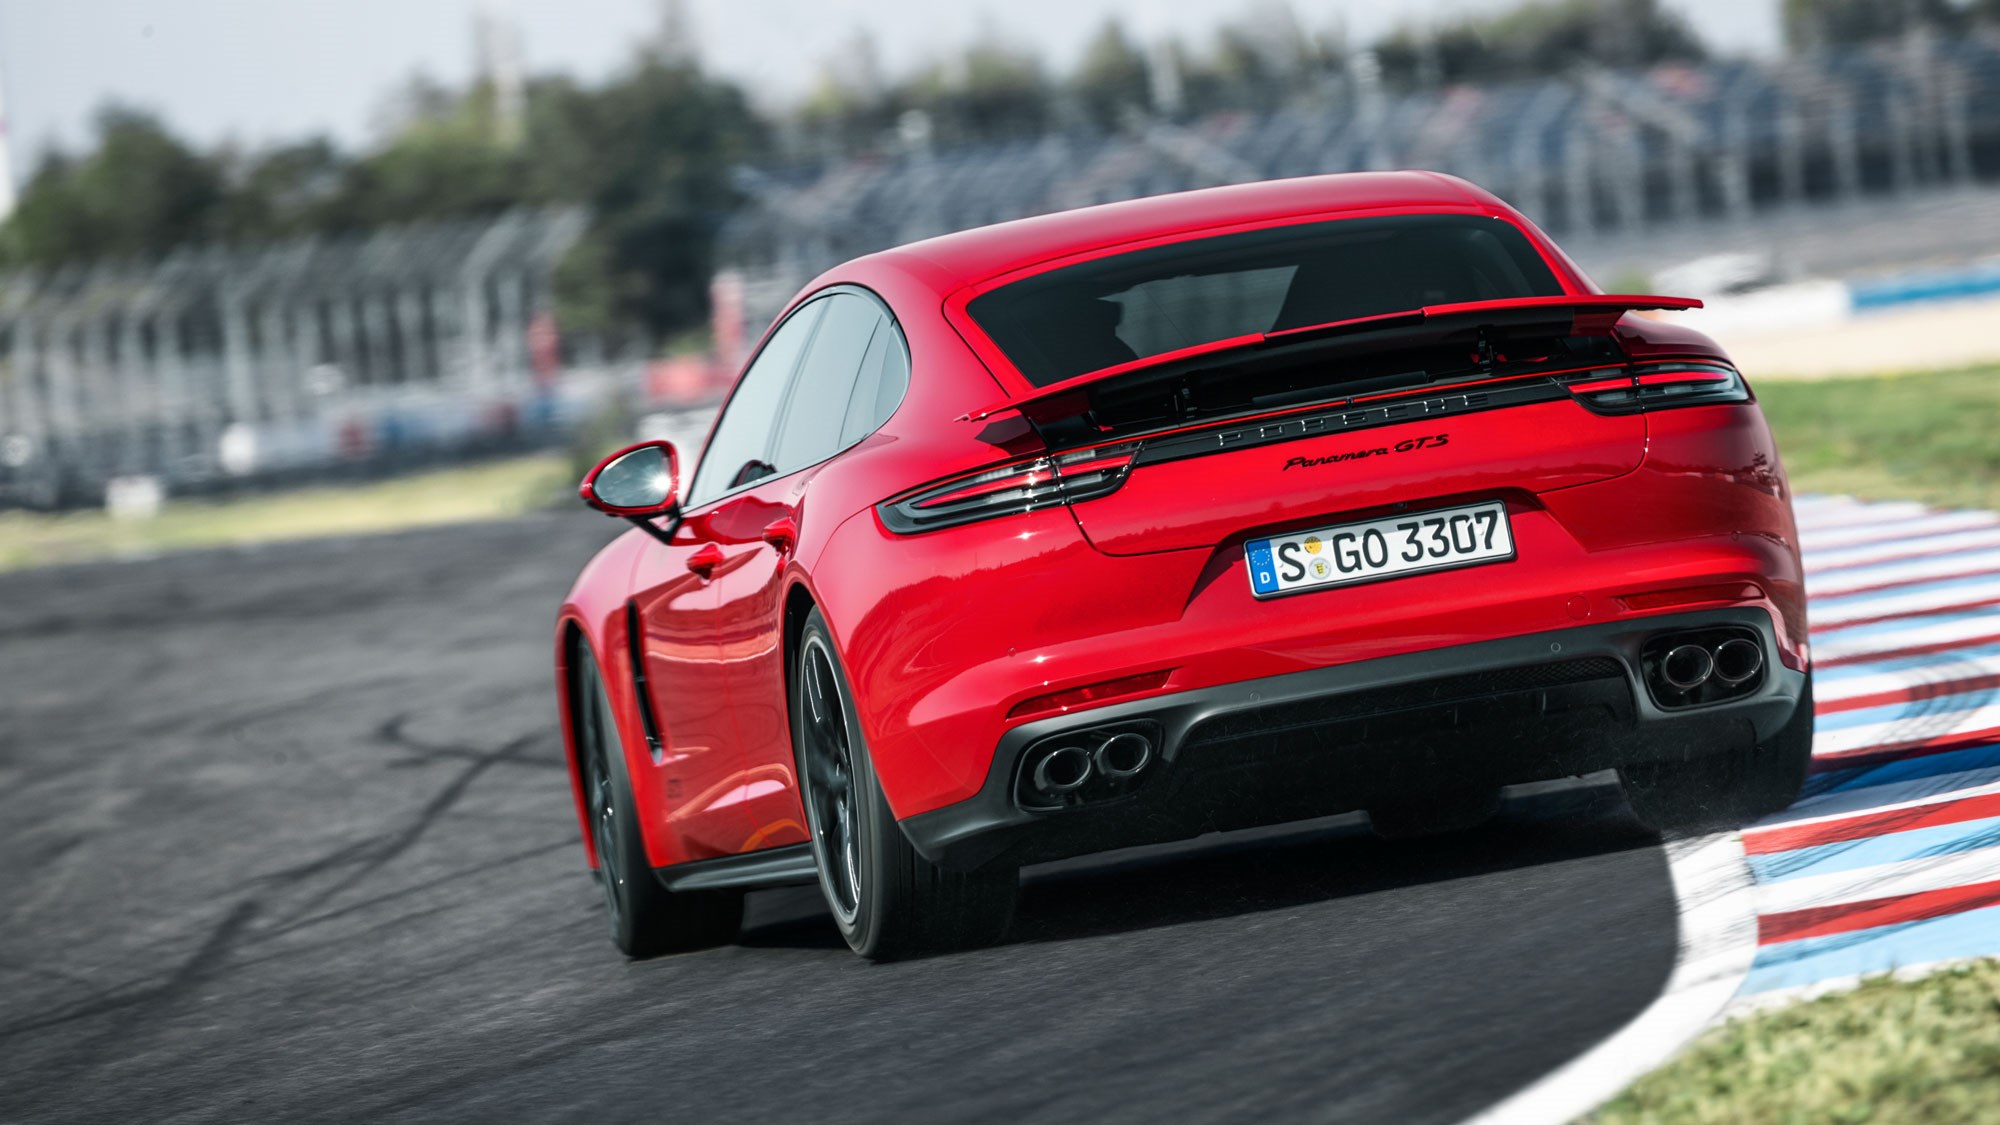 Porsche Panamera Gts 2019 Review The Best Of Both Worlds